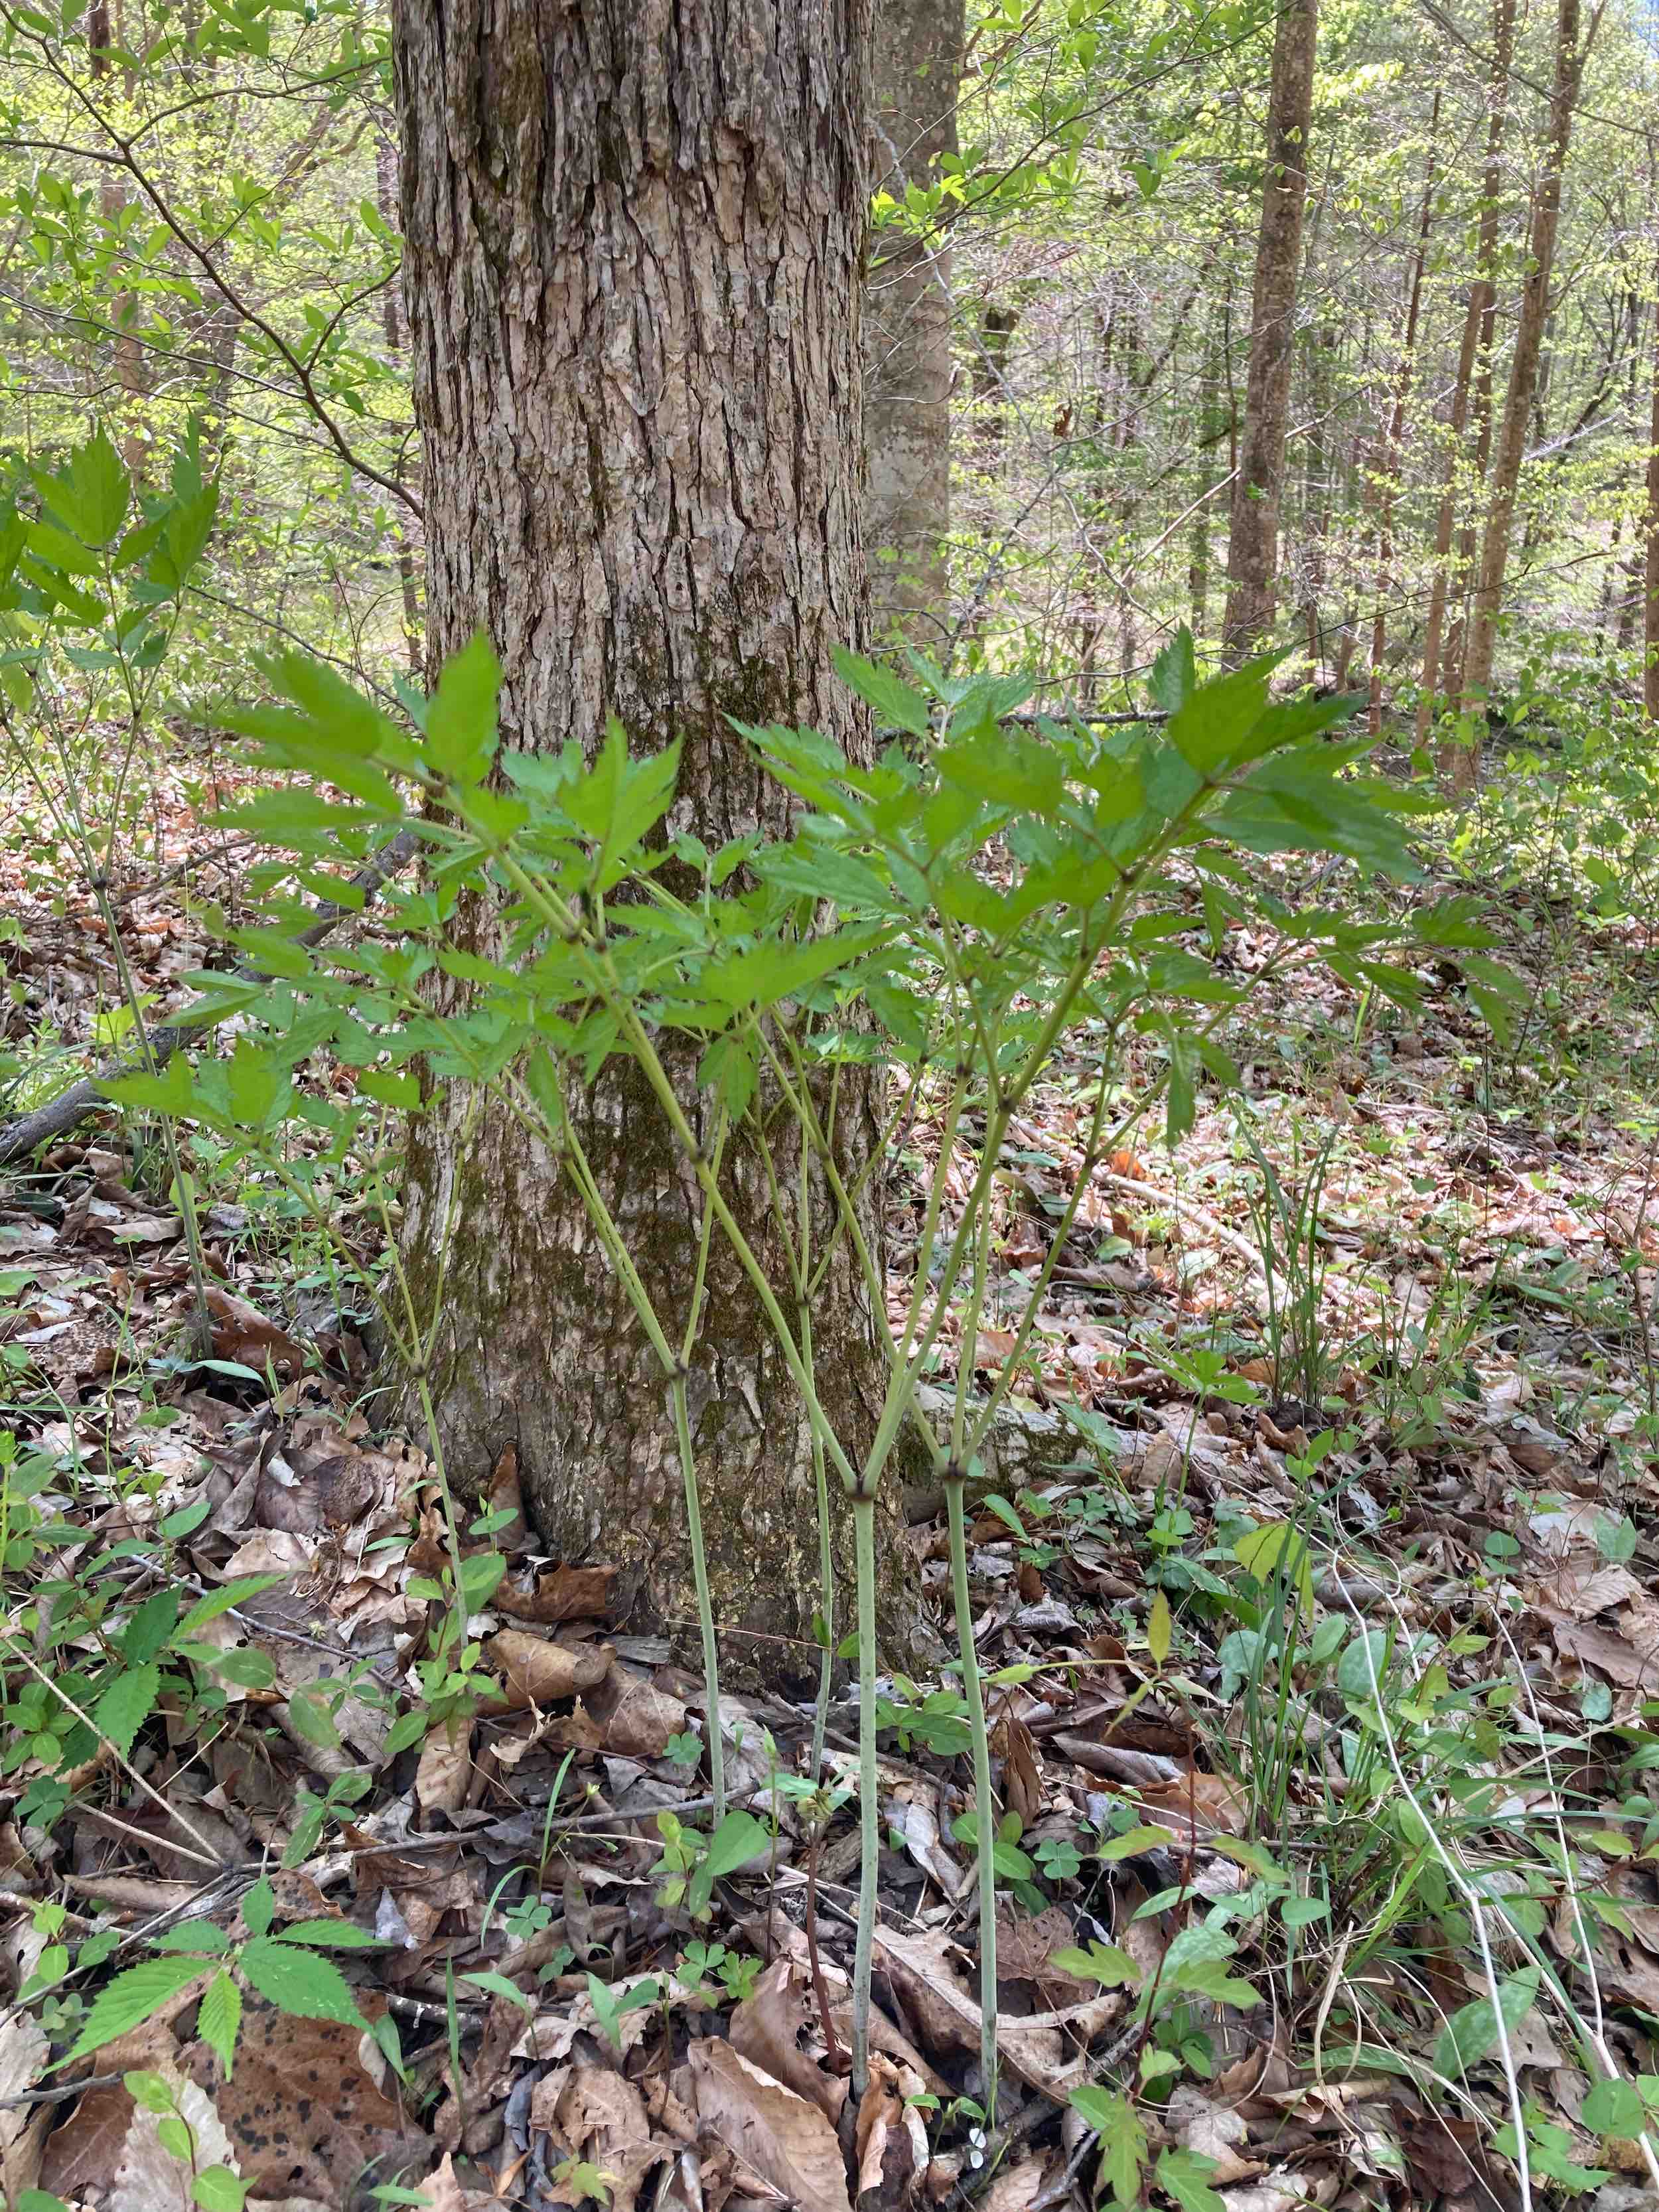 The Scientific Name is Actaea racemosa [= Cimicifuga racemosa]. You will likely hear them called Common Black Cohosh, Early Black Cohosh. This picture shows the A very tall herbaceous species which can grow to heights of 6 or more feet. of Actaea racemosa [= Cimicifuga racemosa]